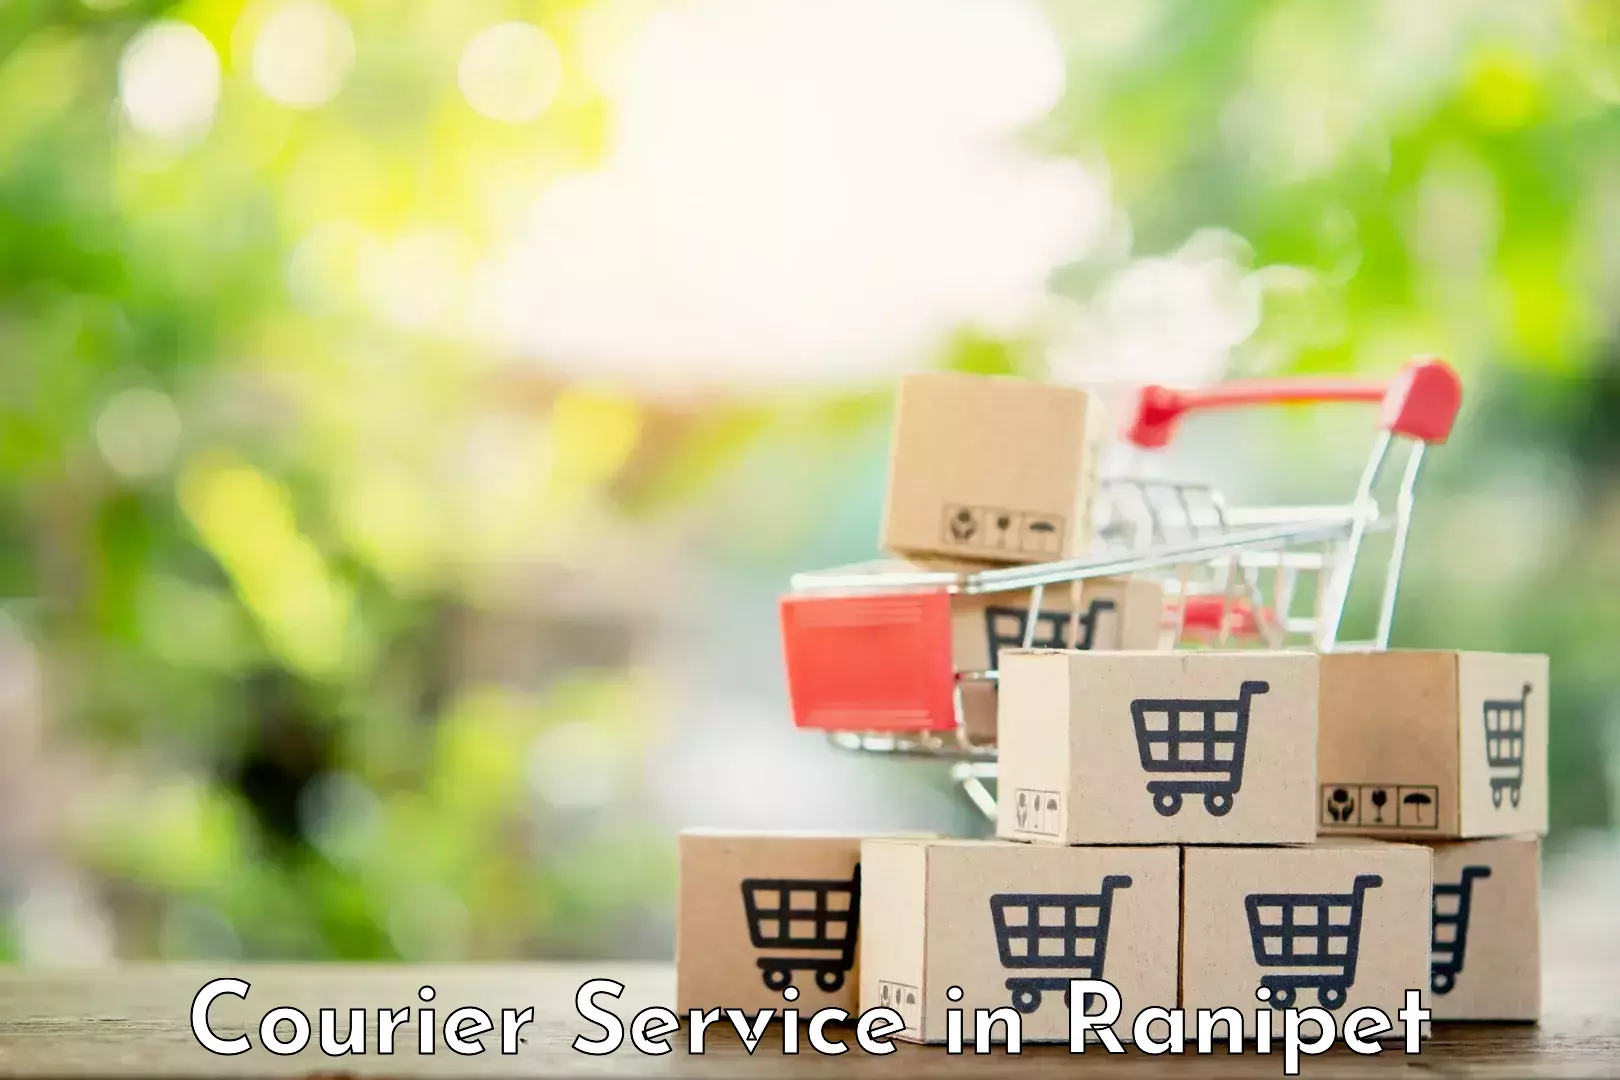 On-time delivery services in Ranipet